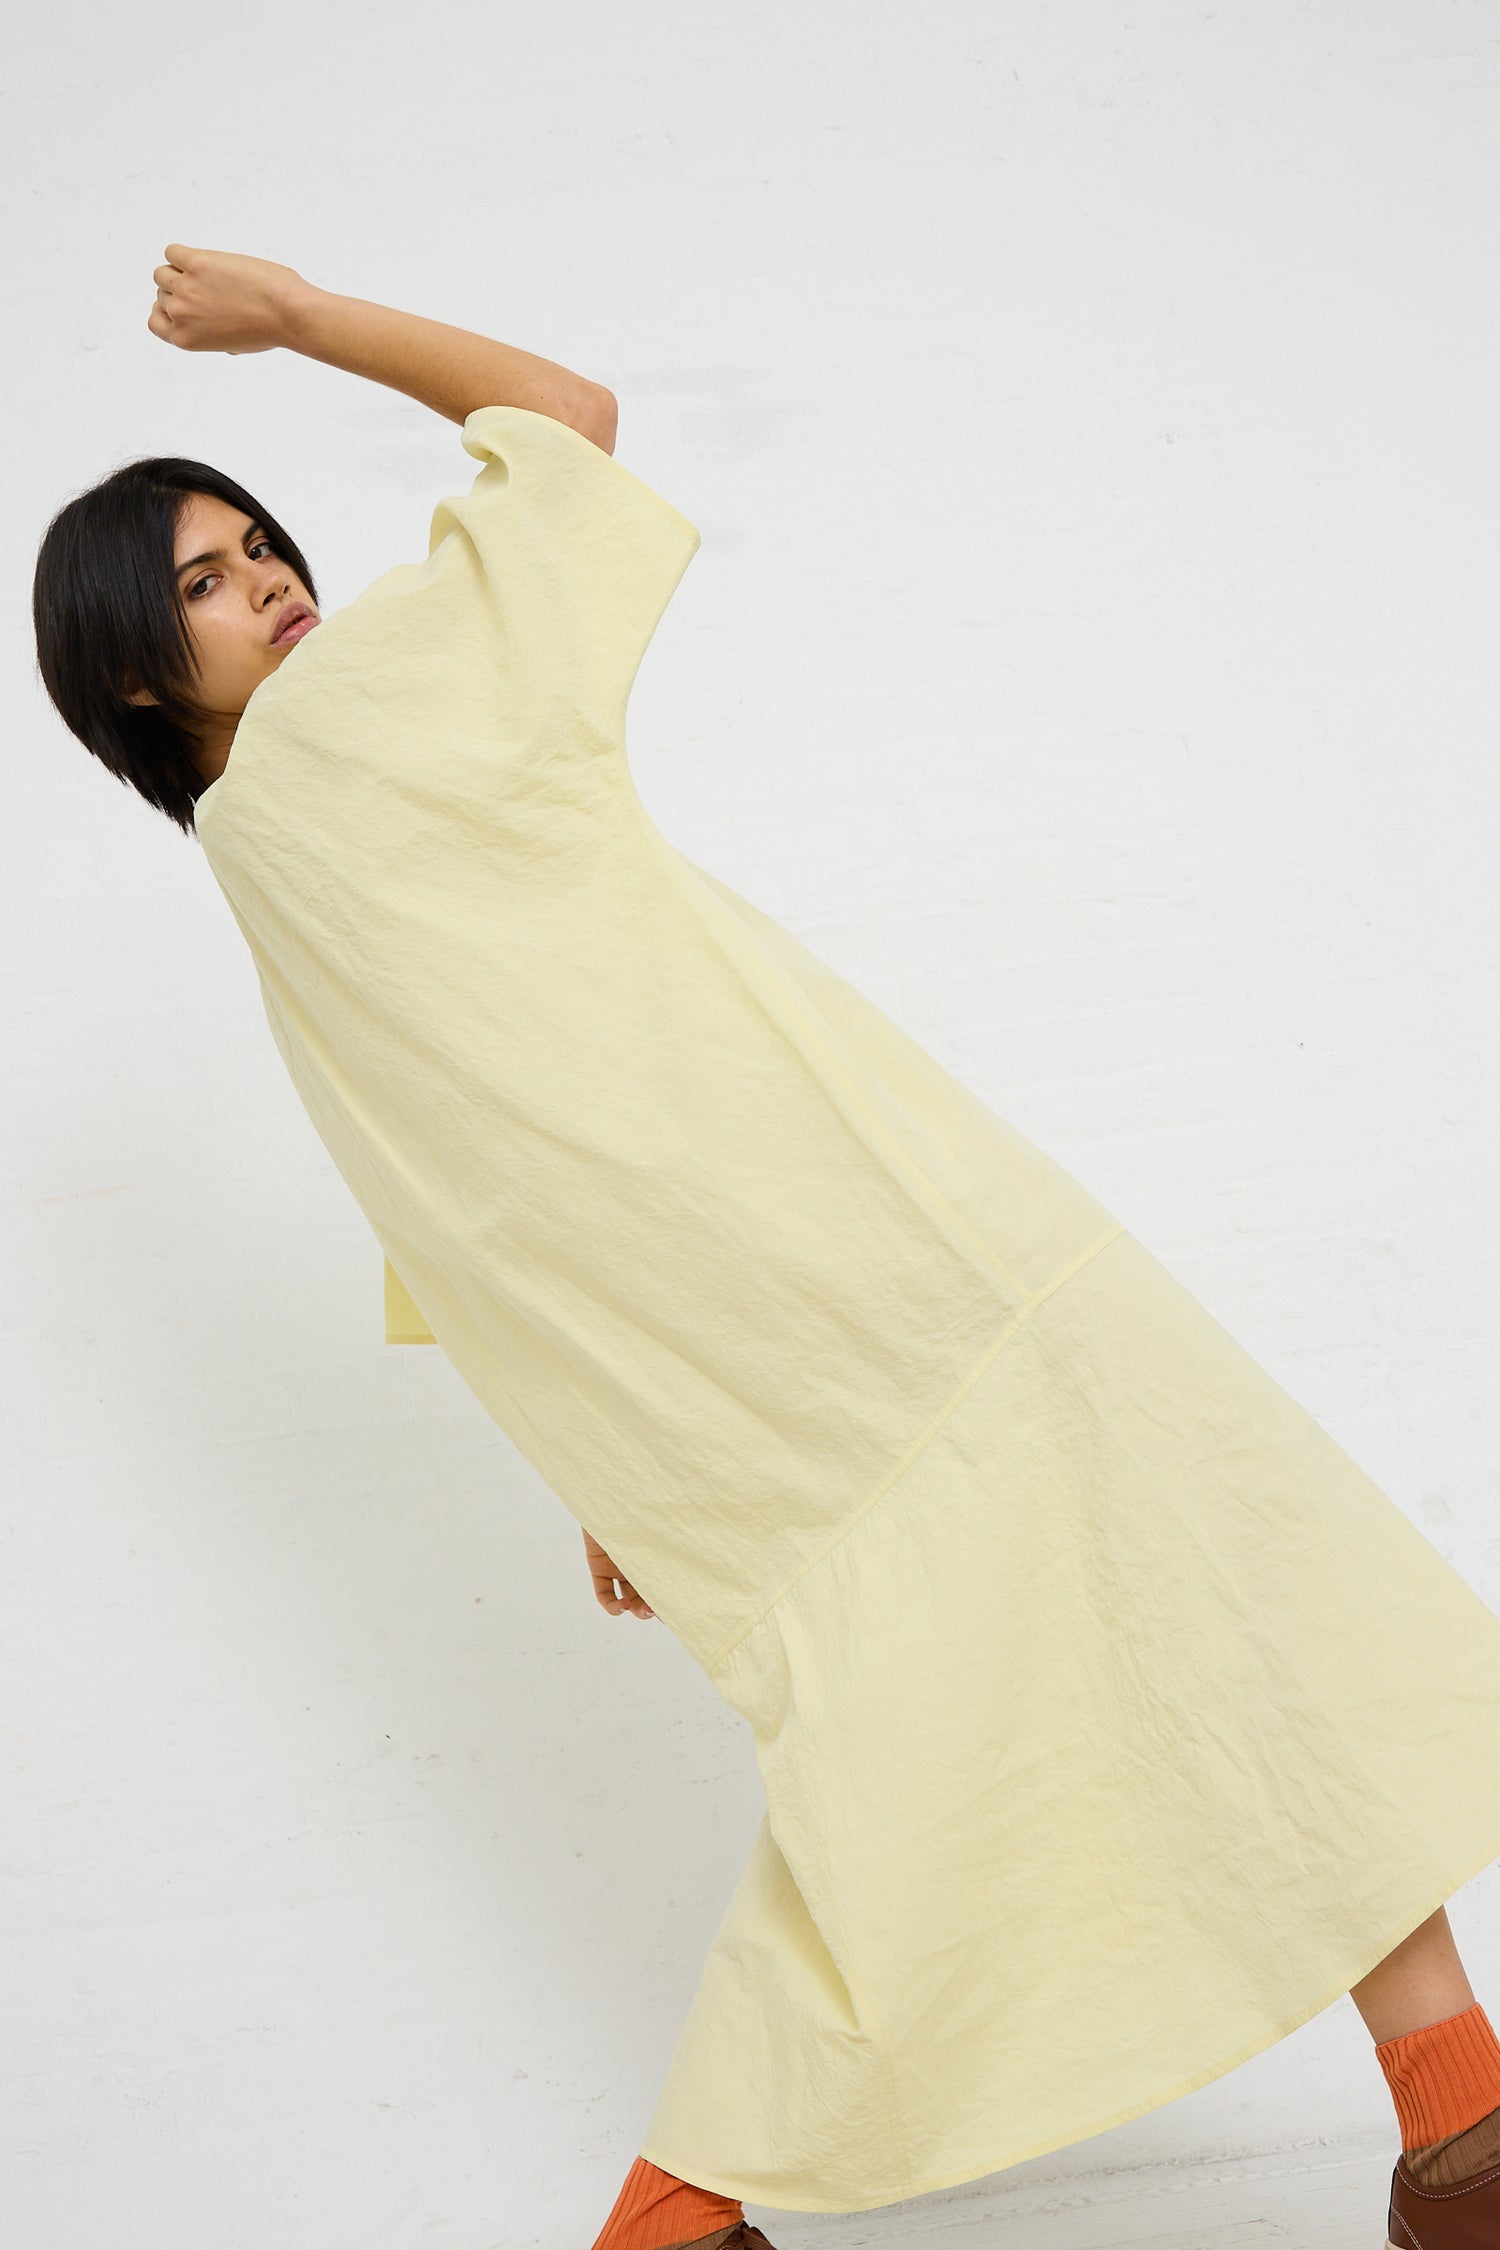 A person in a pale yellow oversized dress made from a sustainable Linen Cotton Delfi Dress in Pastis by Sofie D'Hoore, posing against a white background.